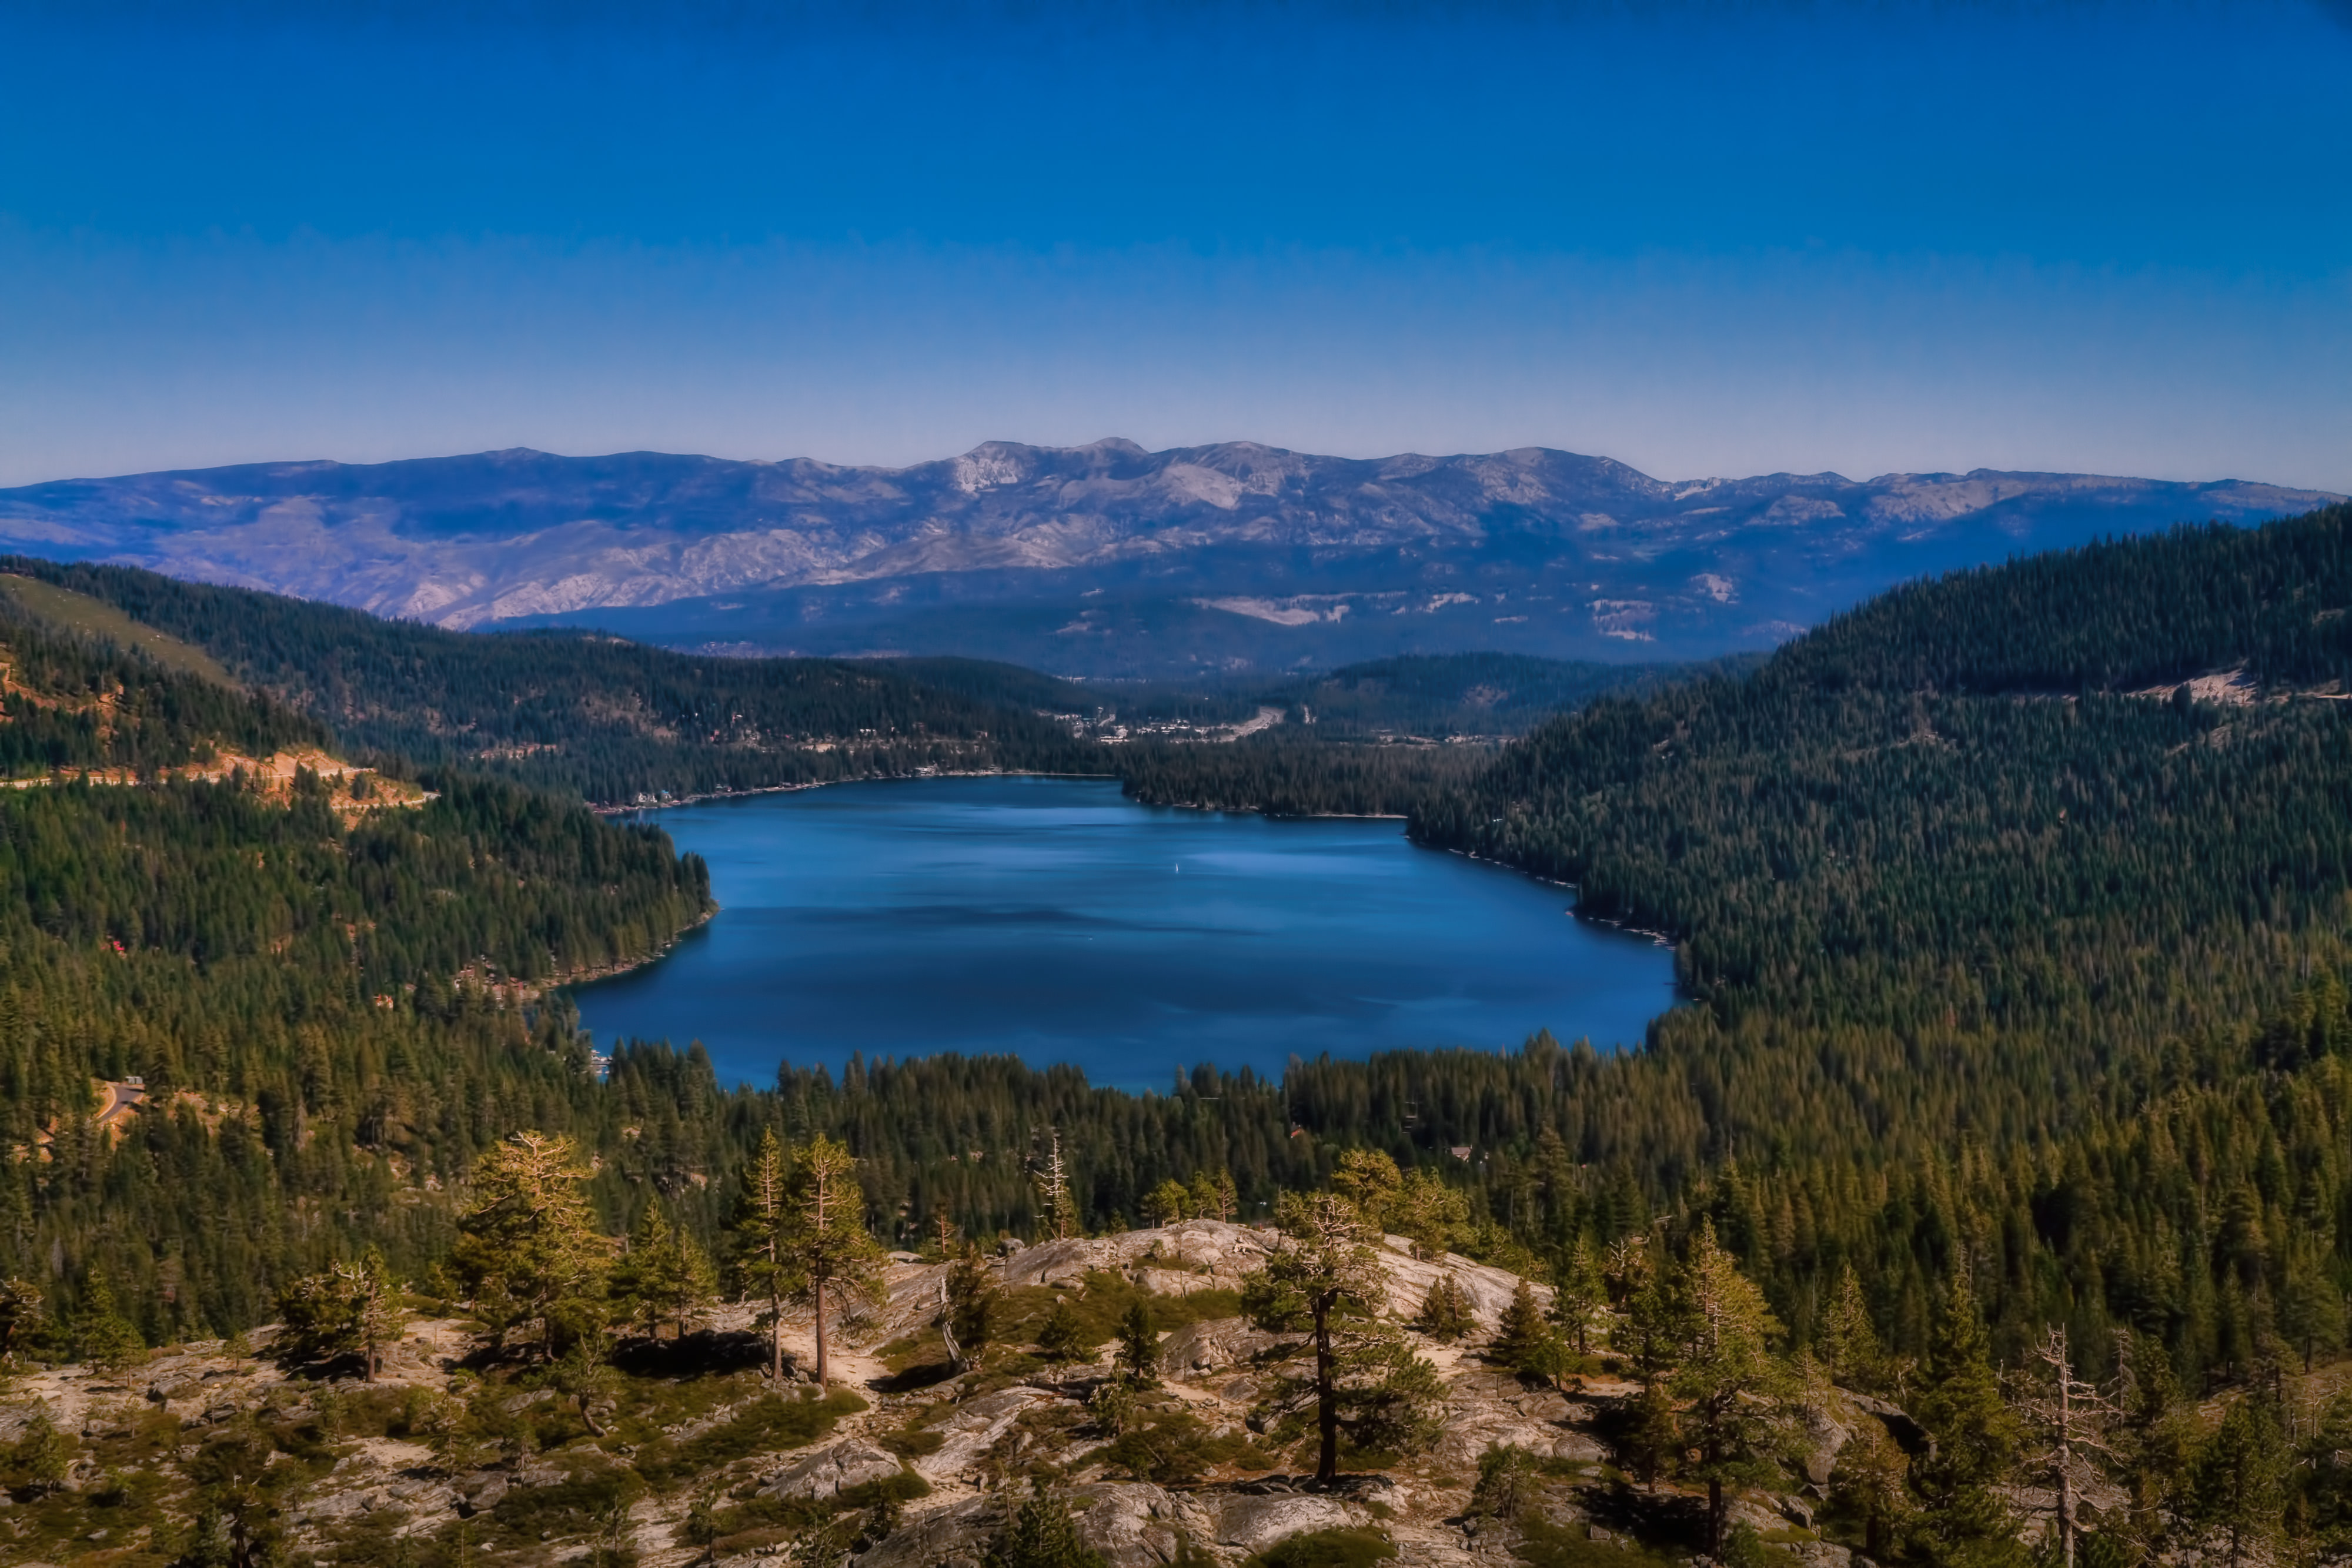 Aerial view looking down on Donner Lake, surrounded by the heavily forested ridges of the northern Sierra Mountains.